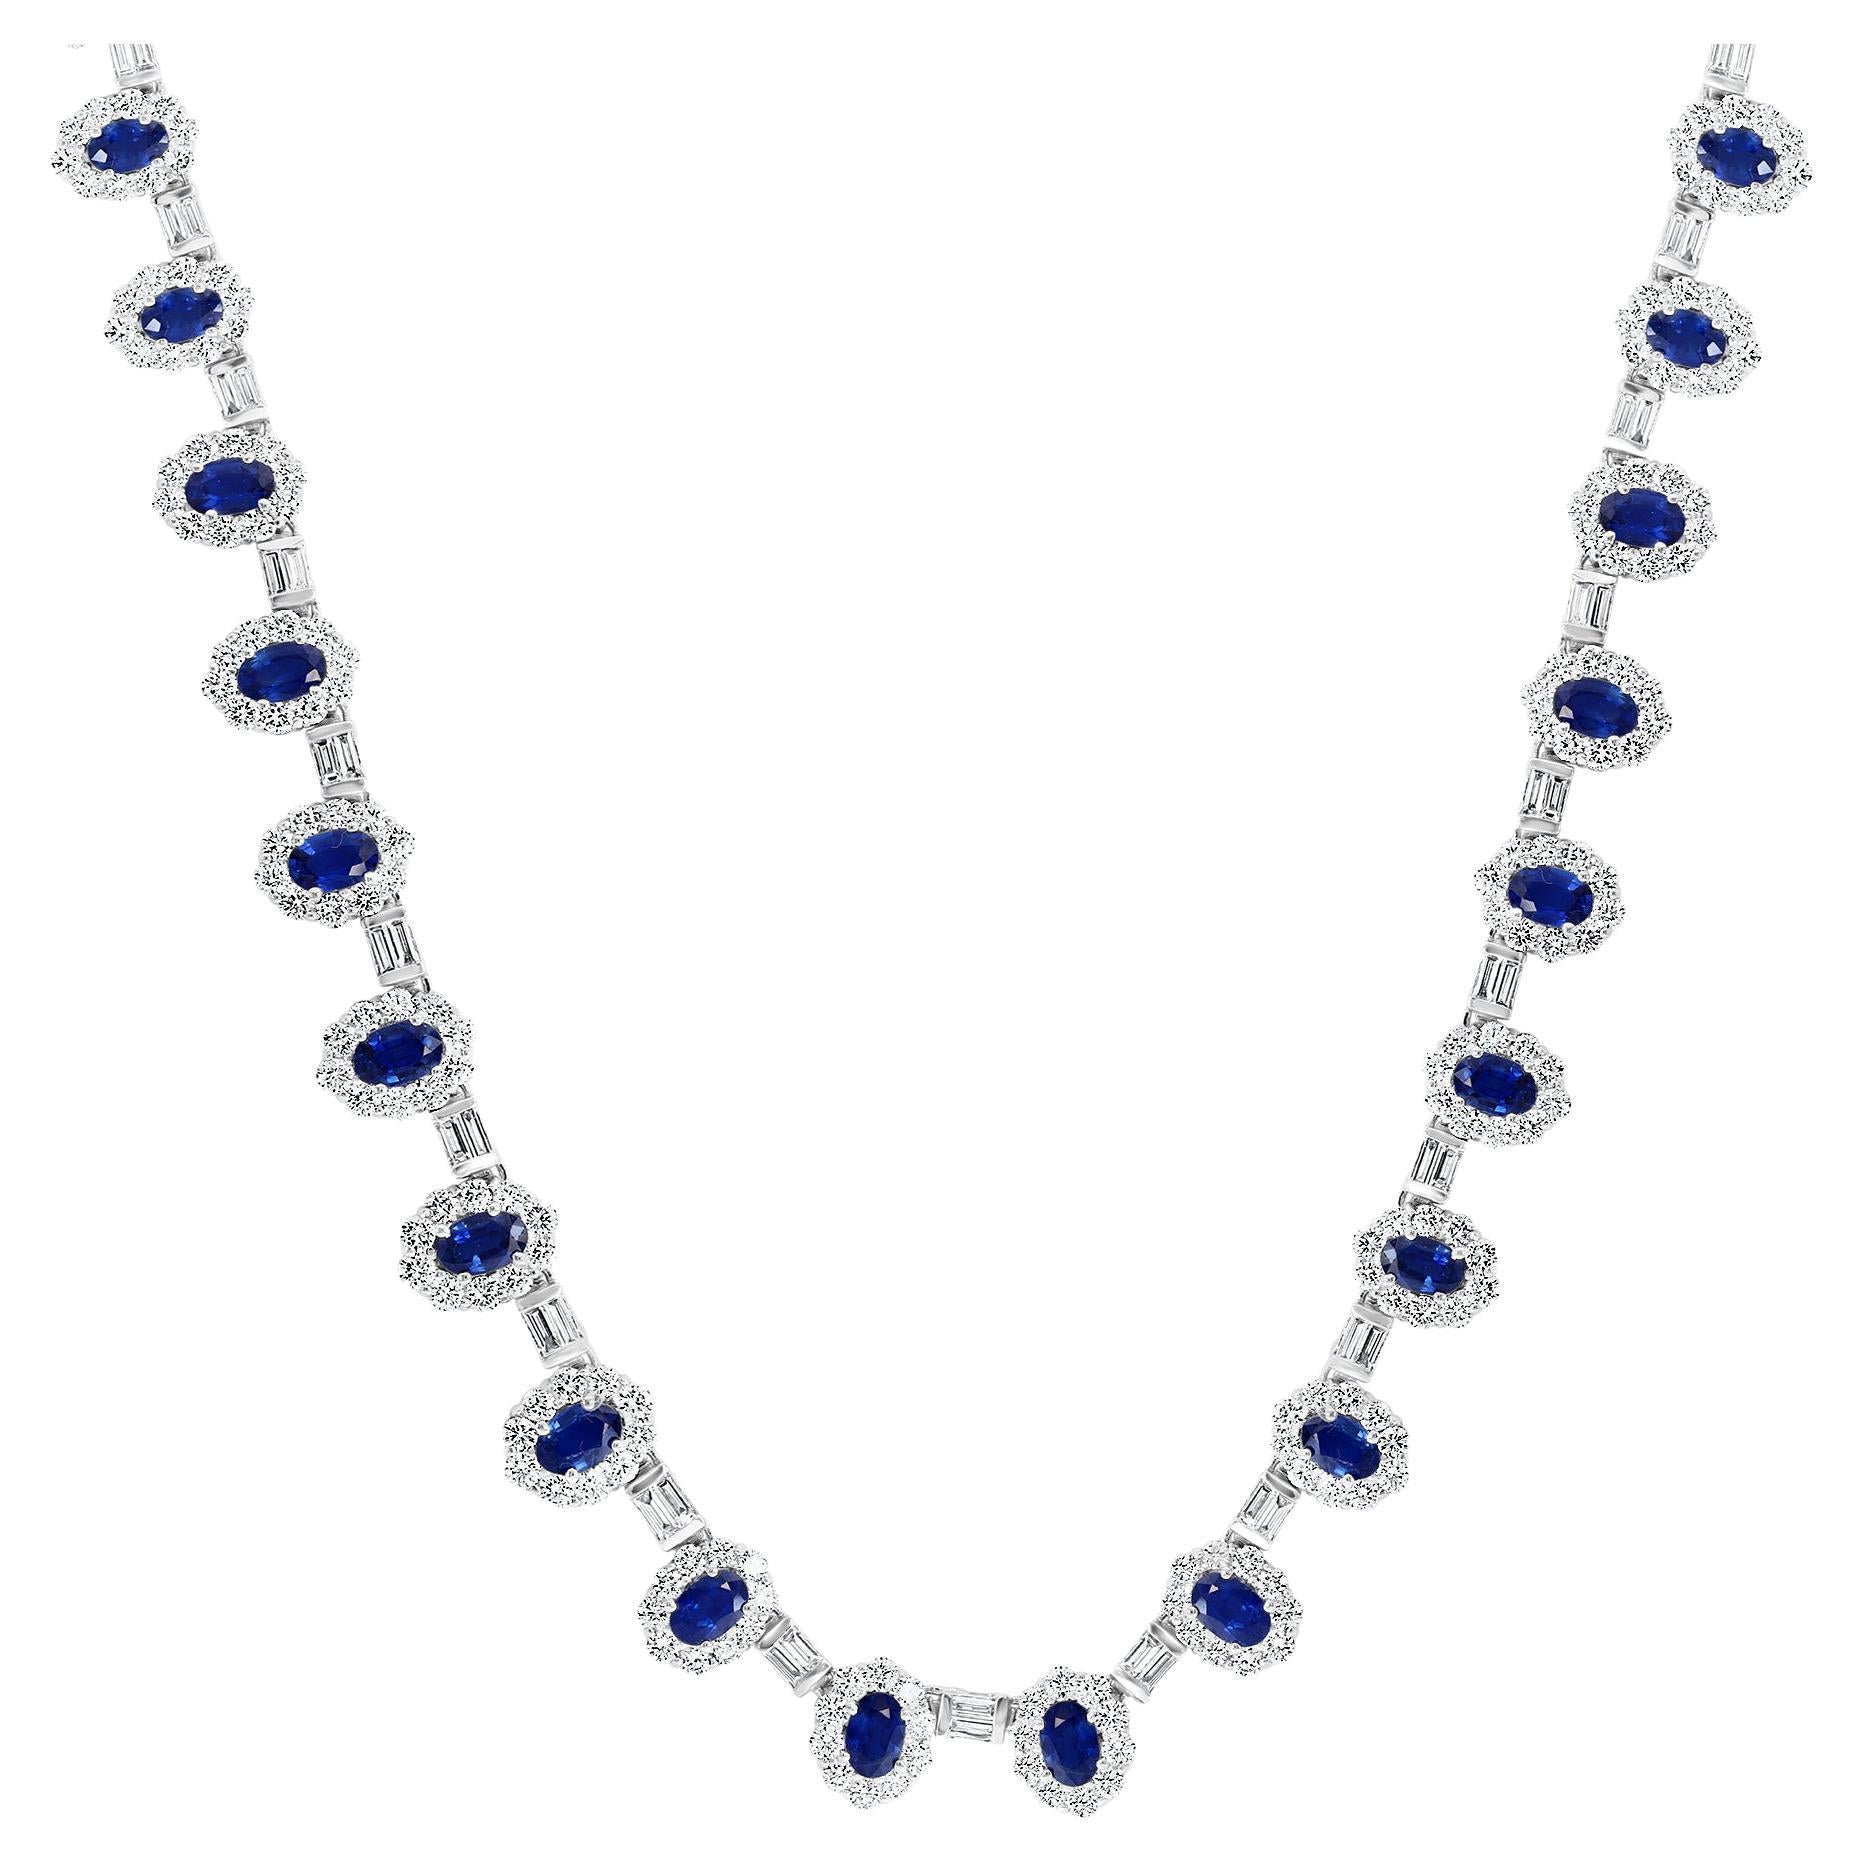 12.74 Carat Oval Cut Blue Sapphire and Diamond Necklace in 18K White Gold For Sale